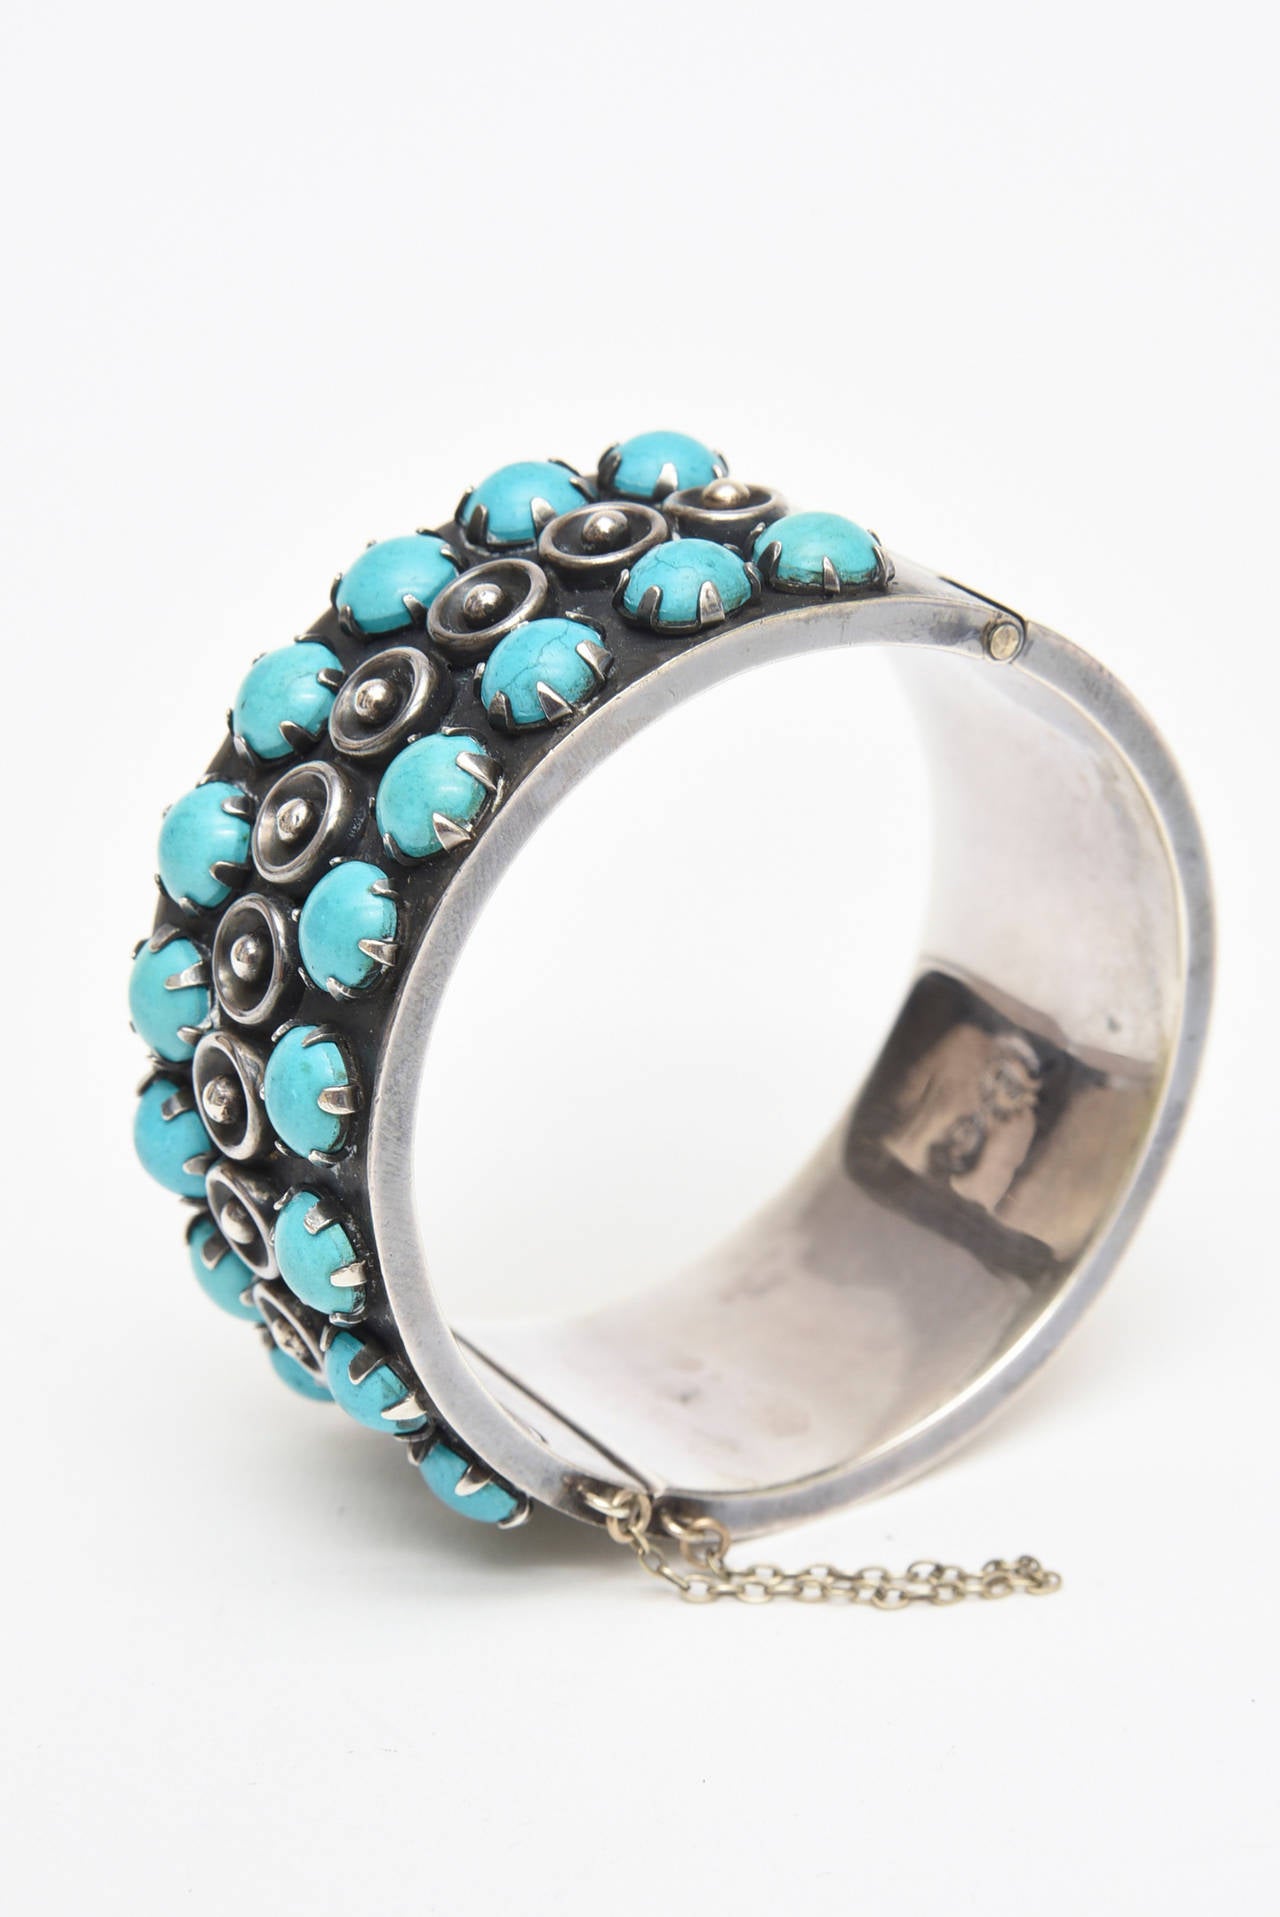 Modern Sterling Silver and Turquoise Cuff Bracelet Vintage